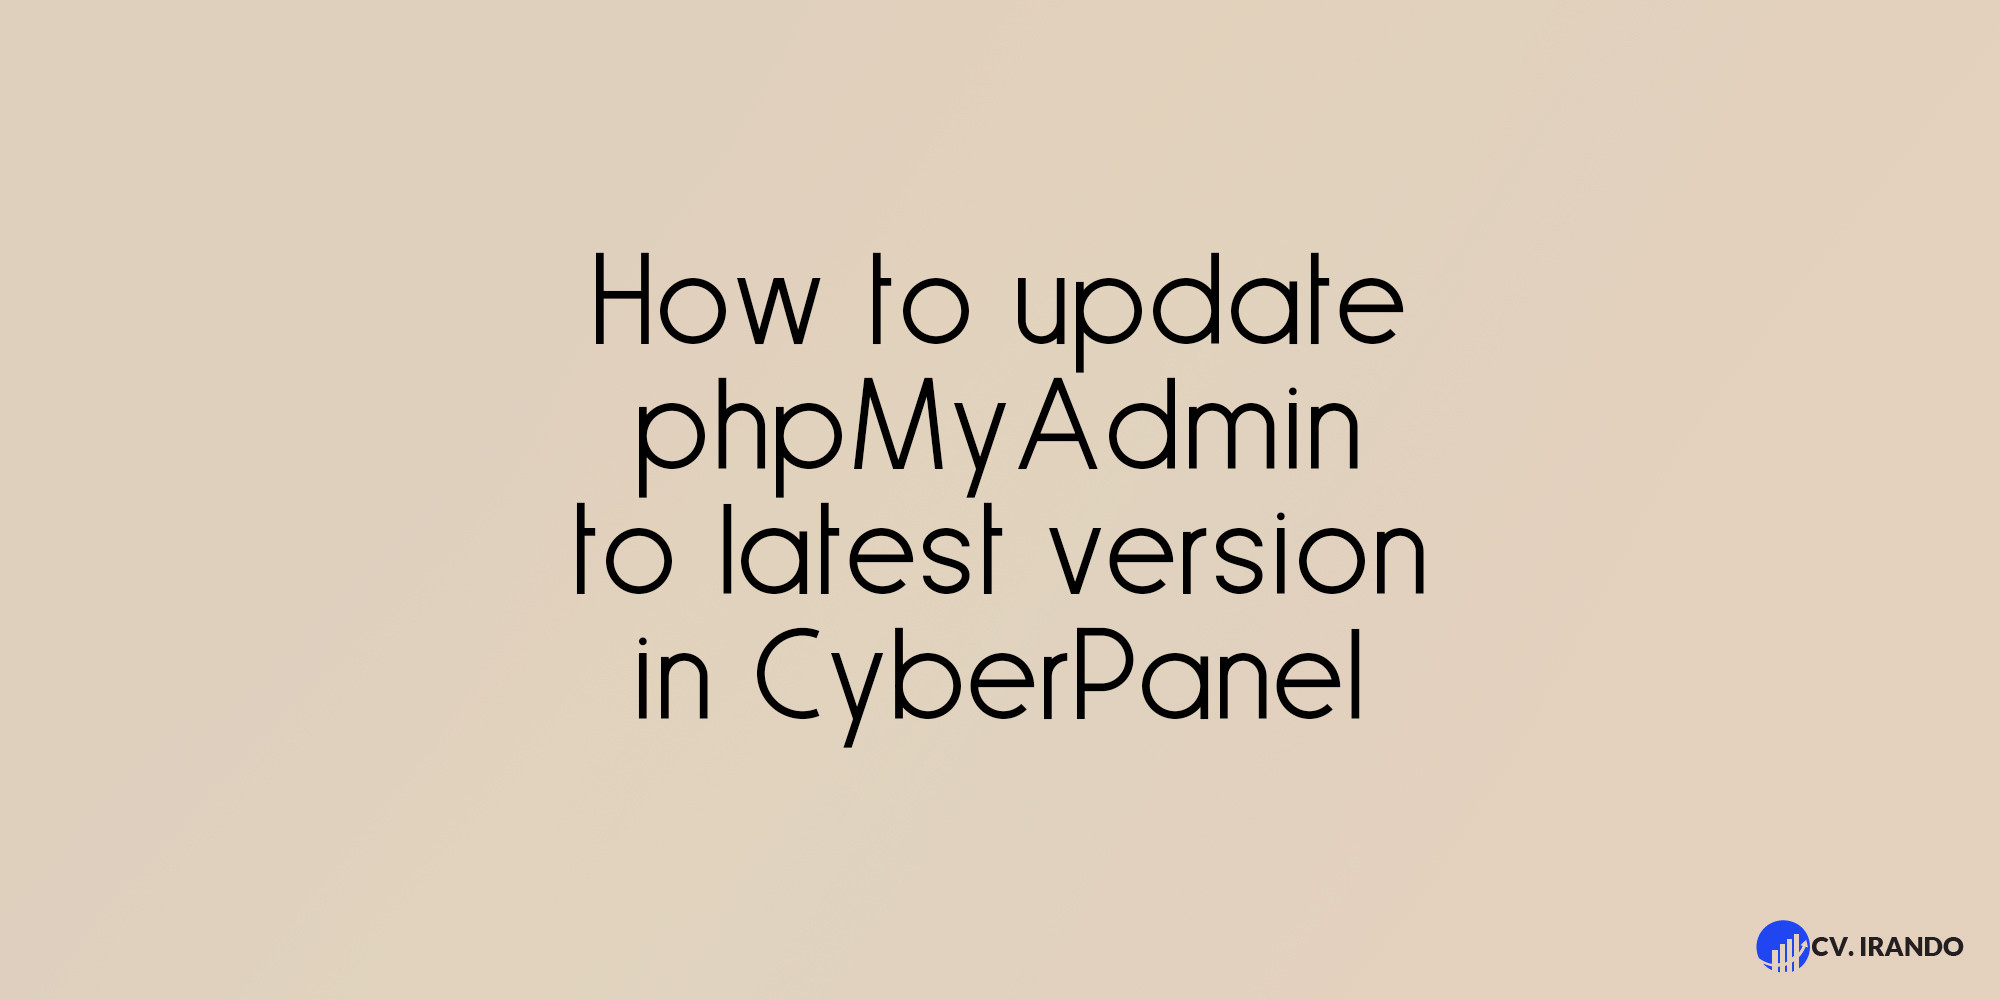 How to update phpMyAdmin to latest version in cyberpanel